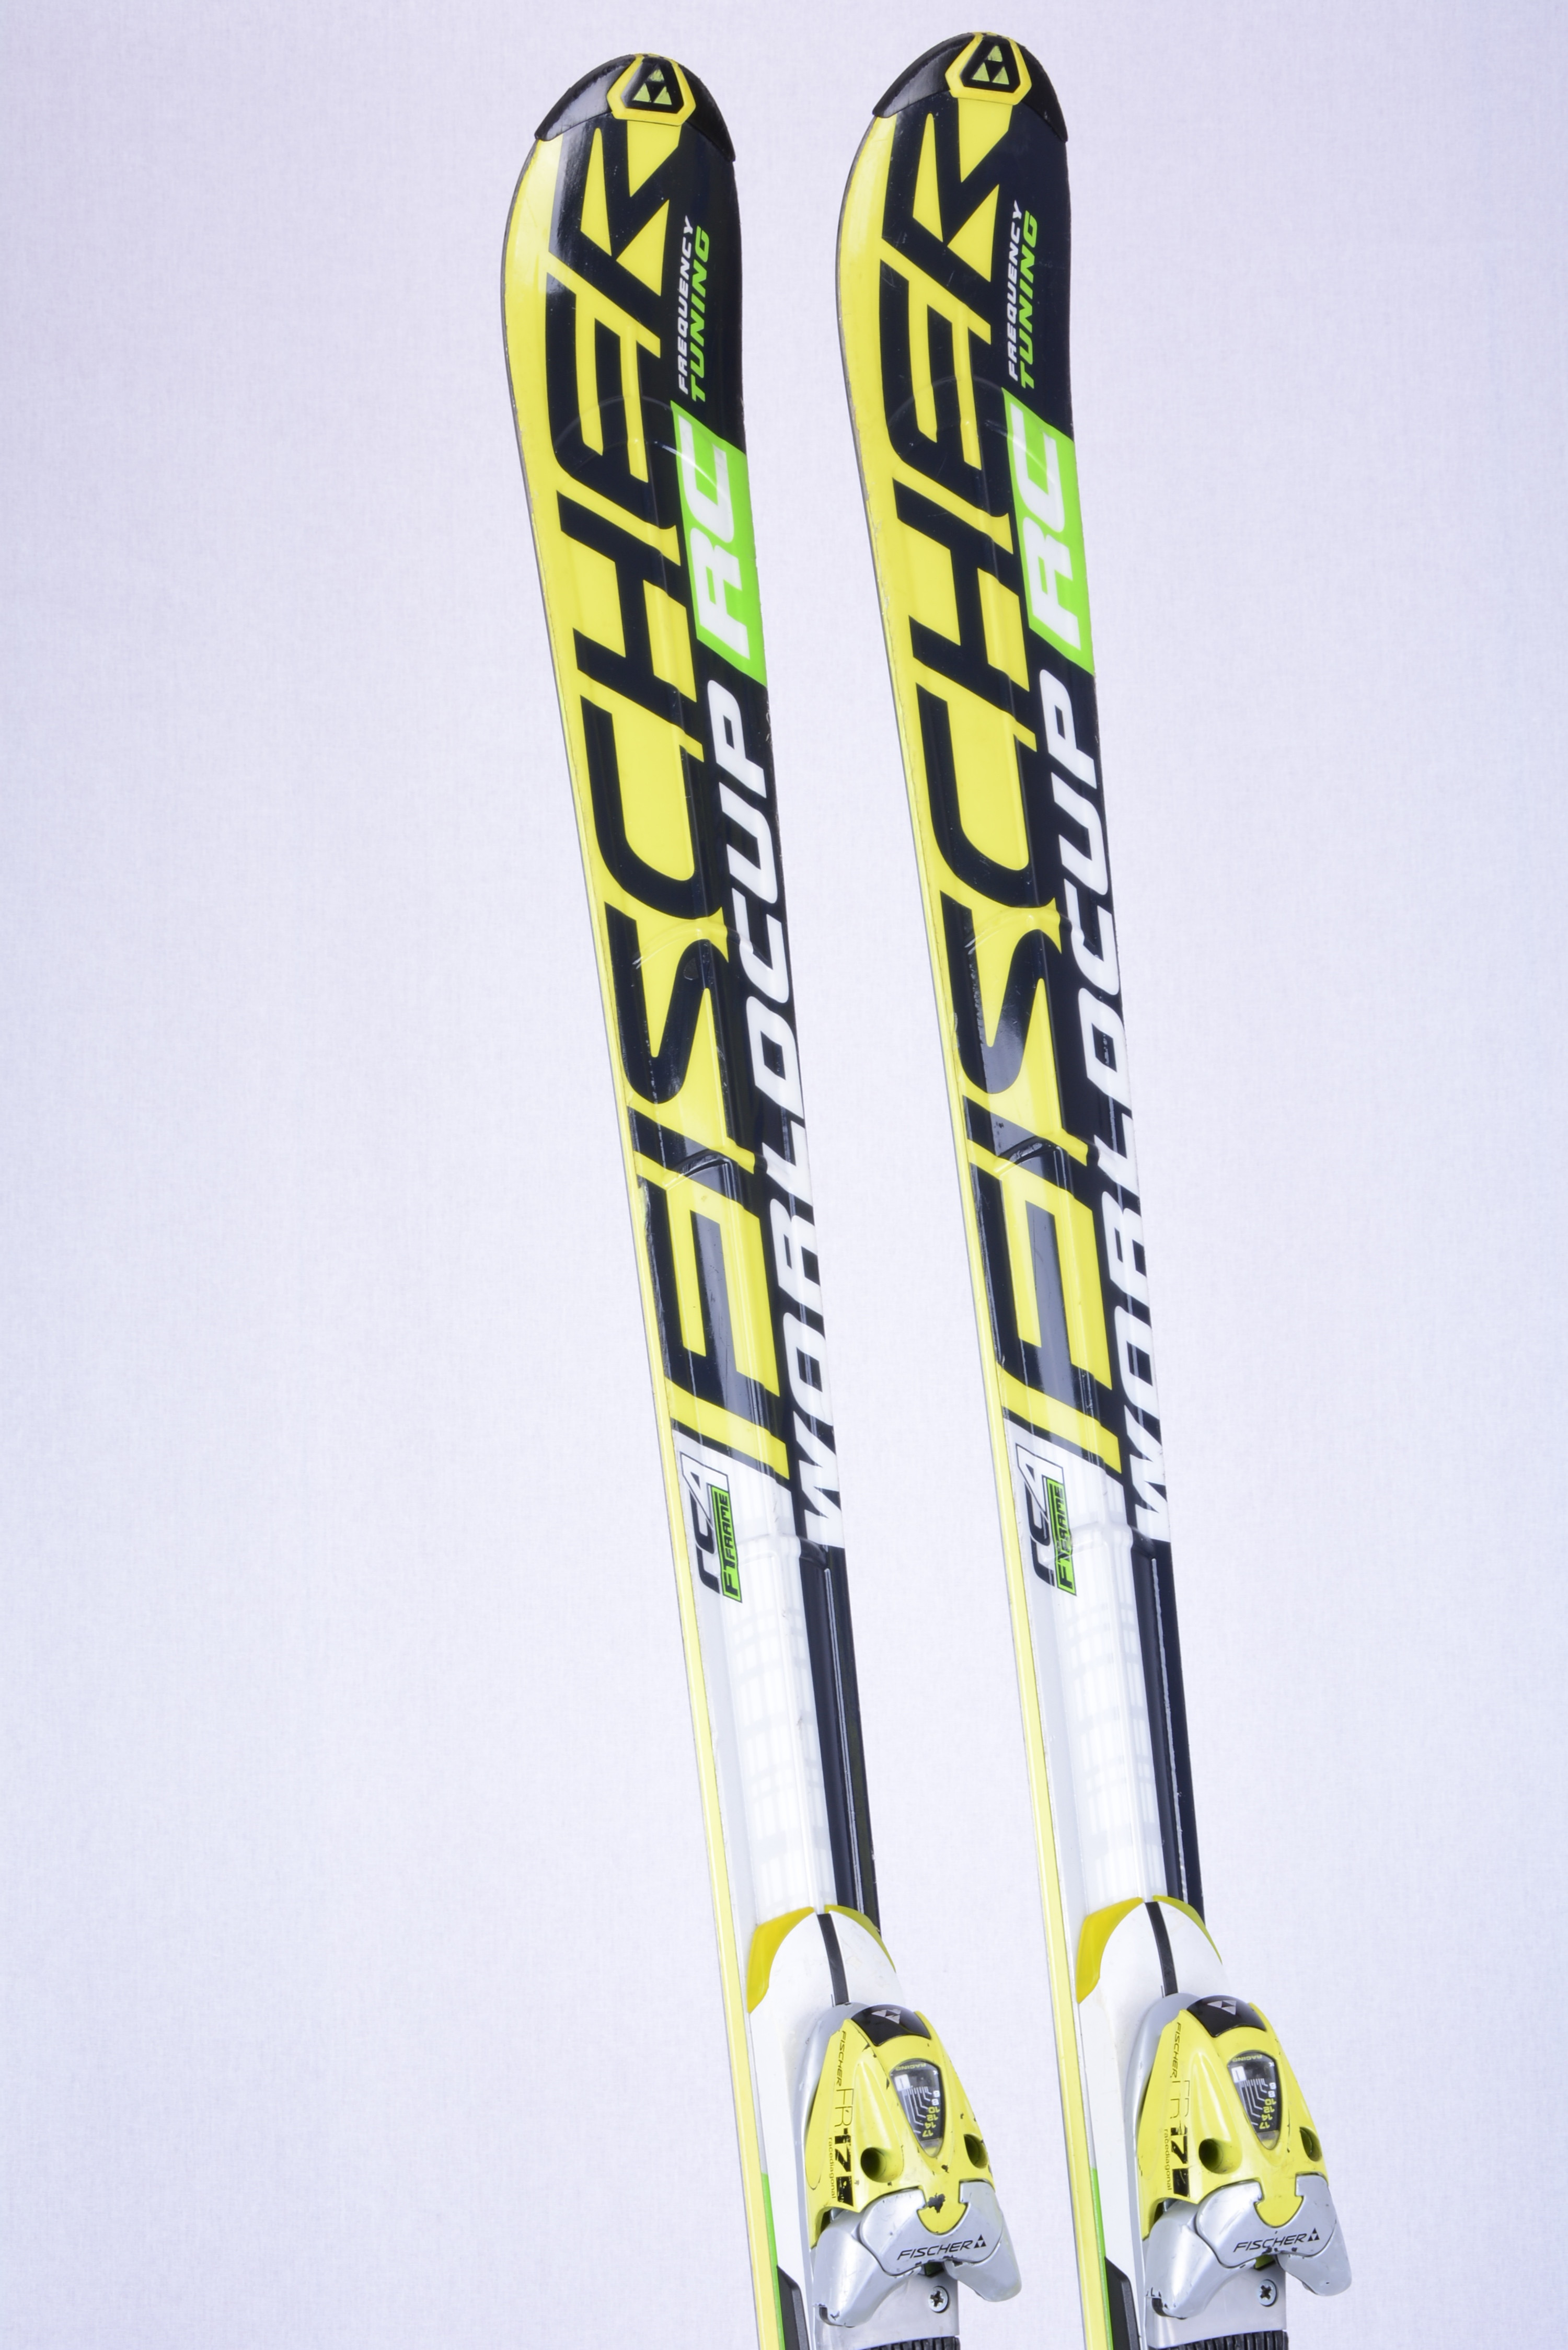 RC RC4 TUNING, WORLDCUP FR FREQUENCY aircarbon ft 17 + skis titanium FISCHER Fischer frame,